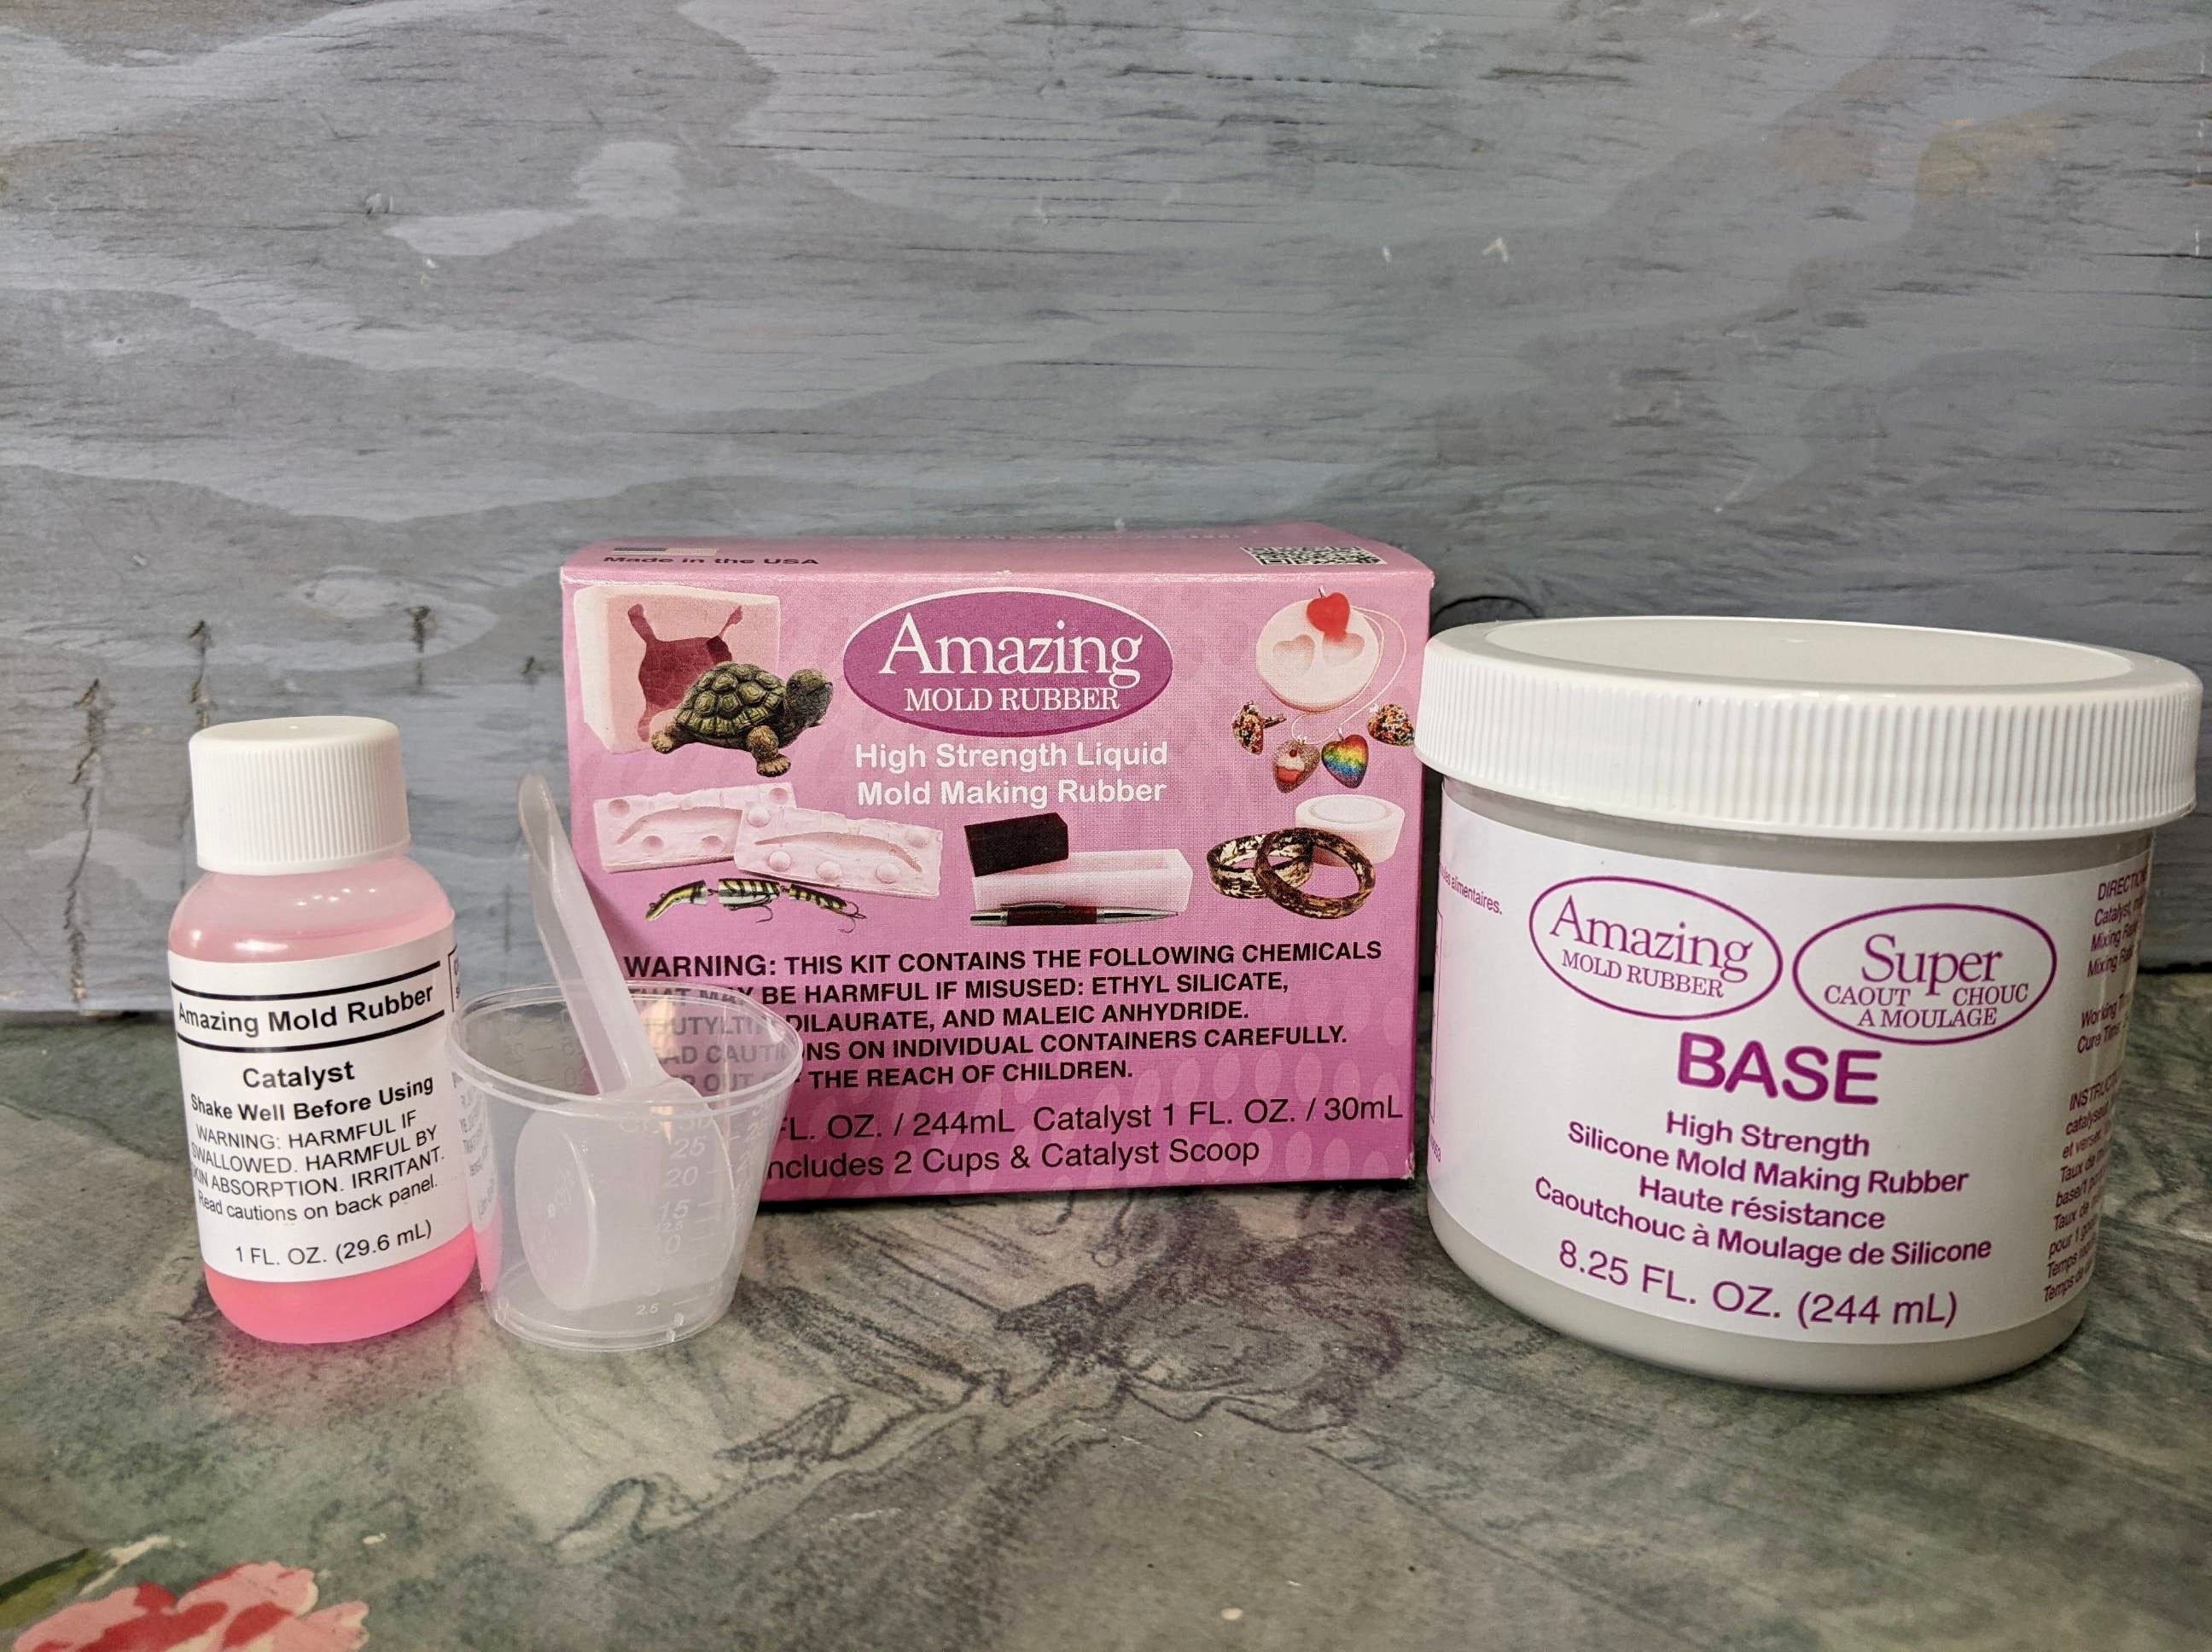 Alumilite Cast, Mold Putty, and Resin – Jami Ray Vintage